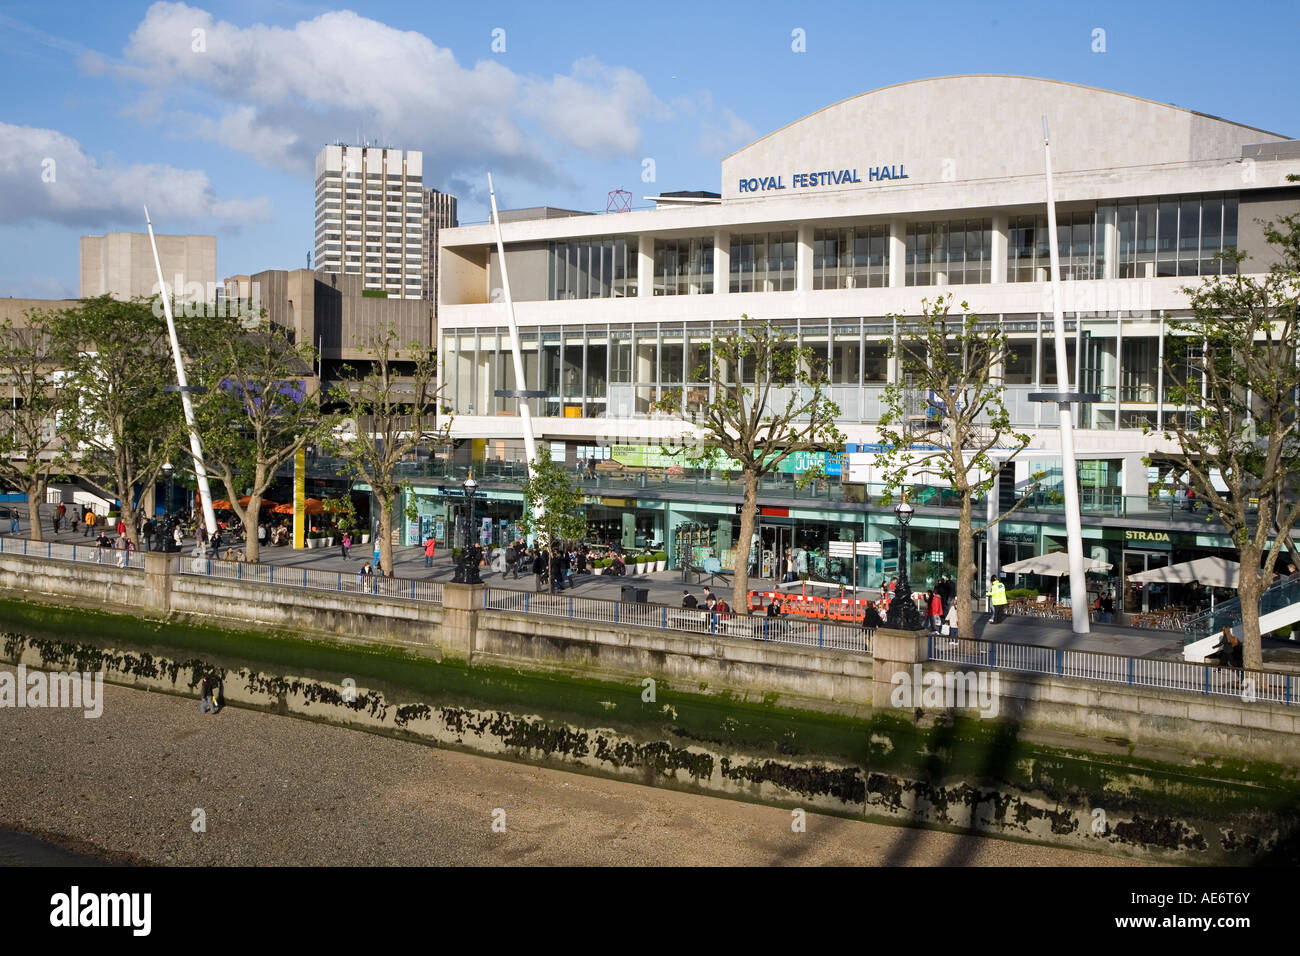 Royal Festival Hall on the southbanks of the river Thames London England Stock Photo